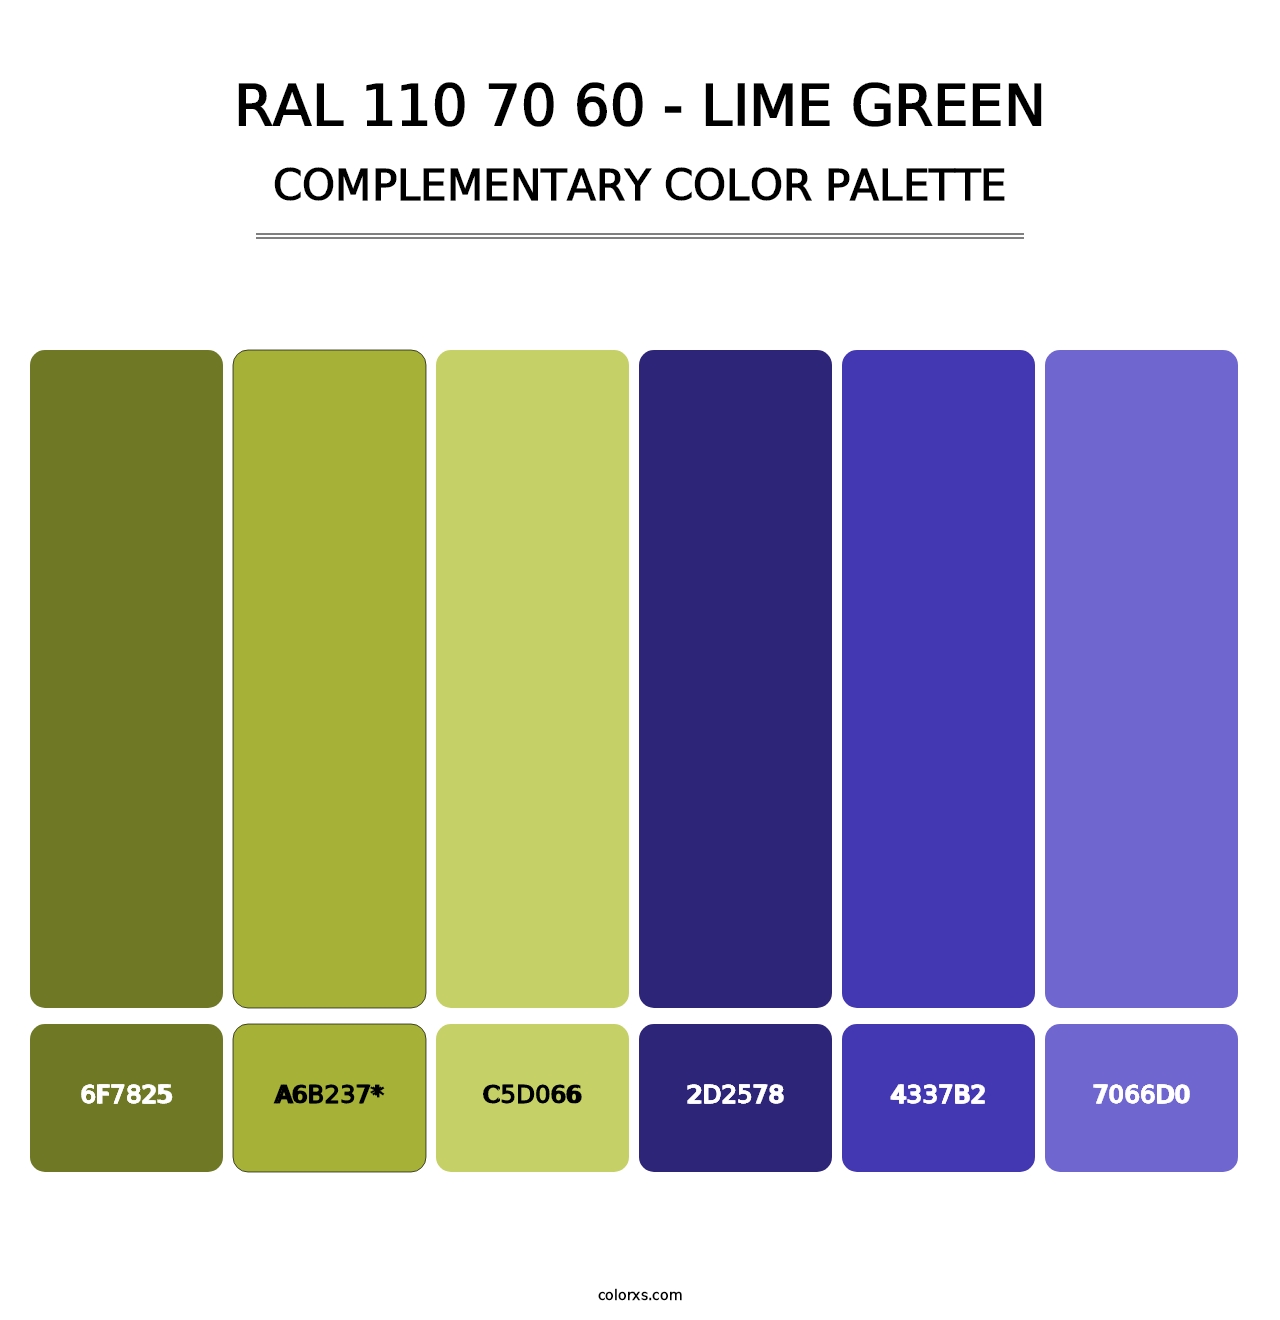 RAL 110 70 60 - Lime Green - Complementary Color Palette